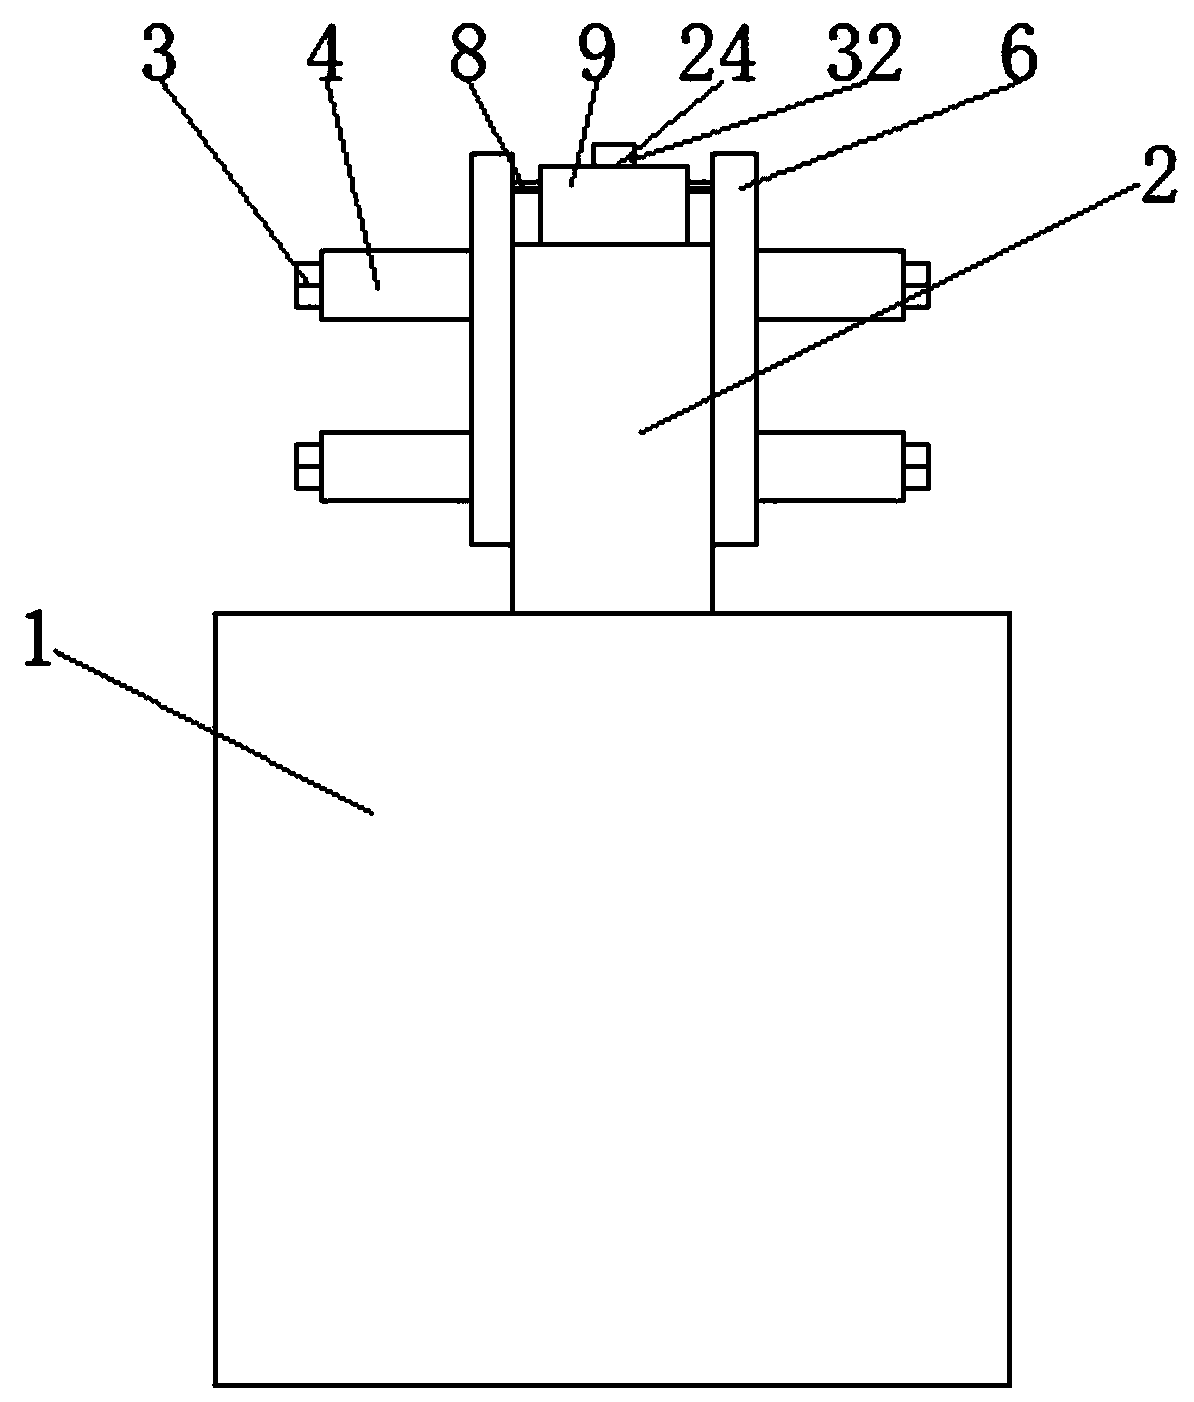 A winding device for ribbon production